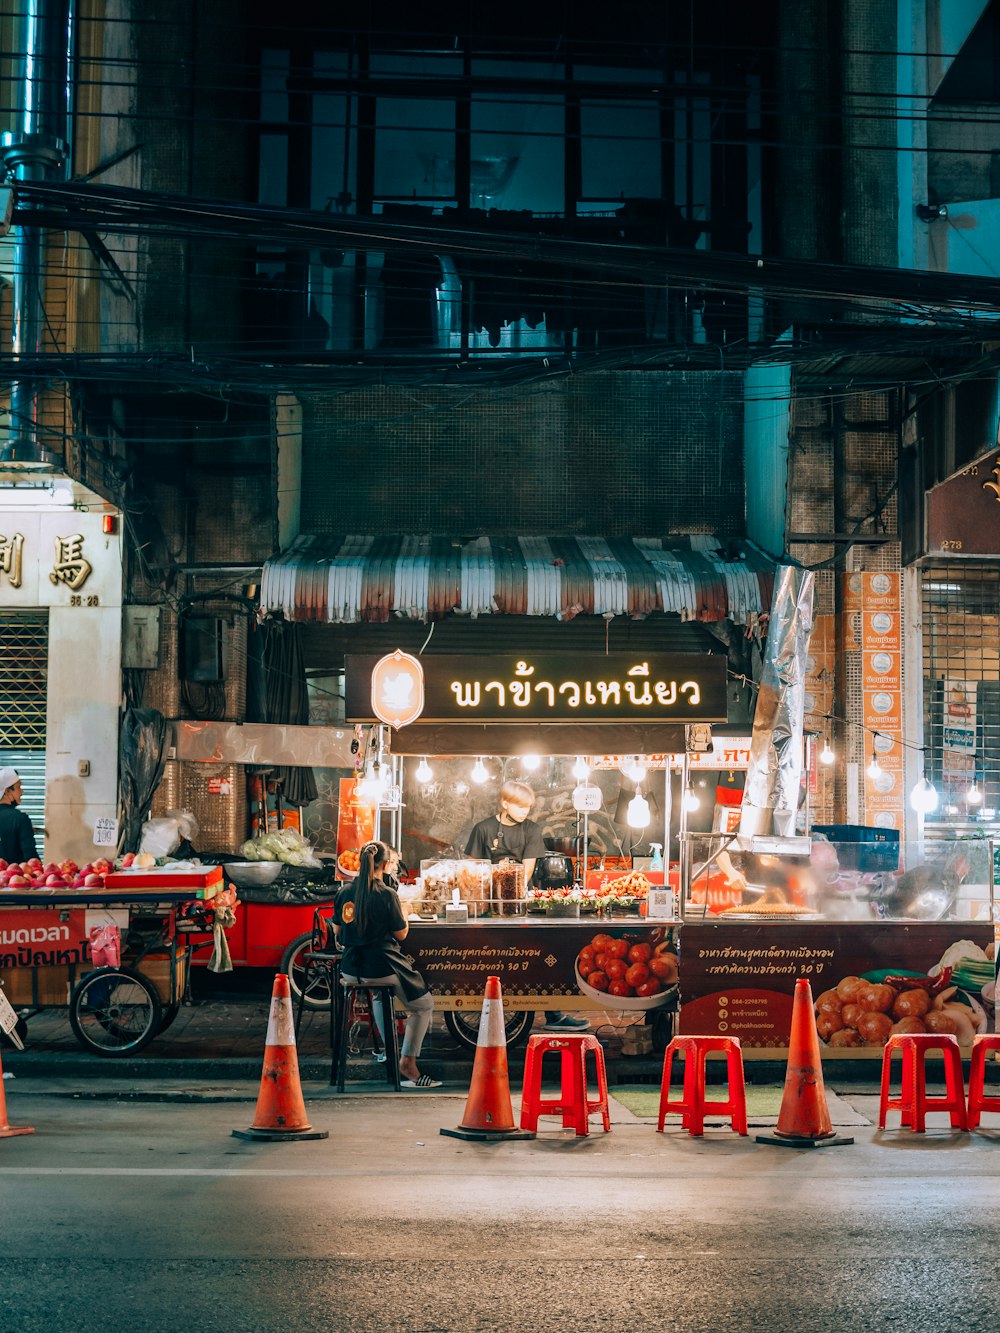 a street scene with traffic cones and a food stand